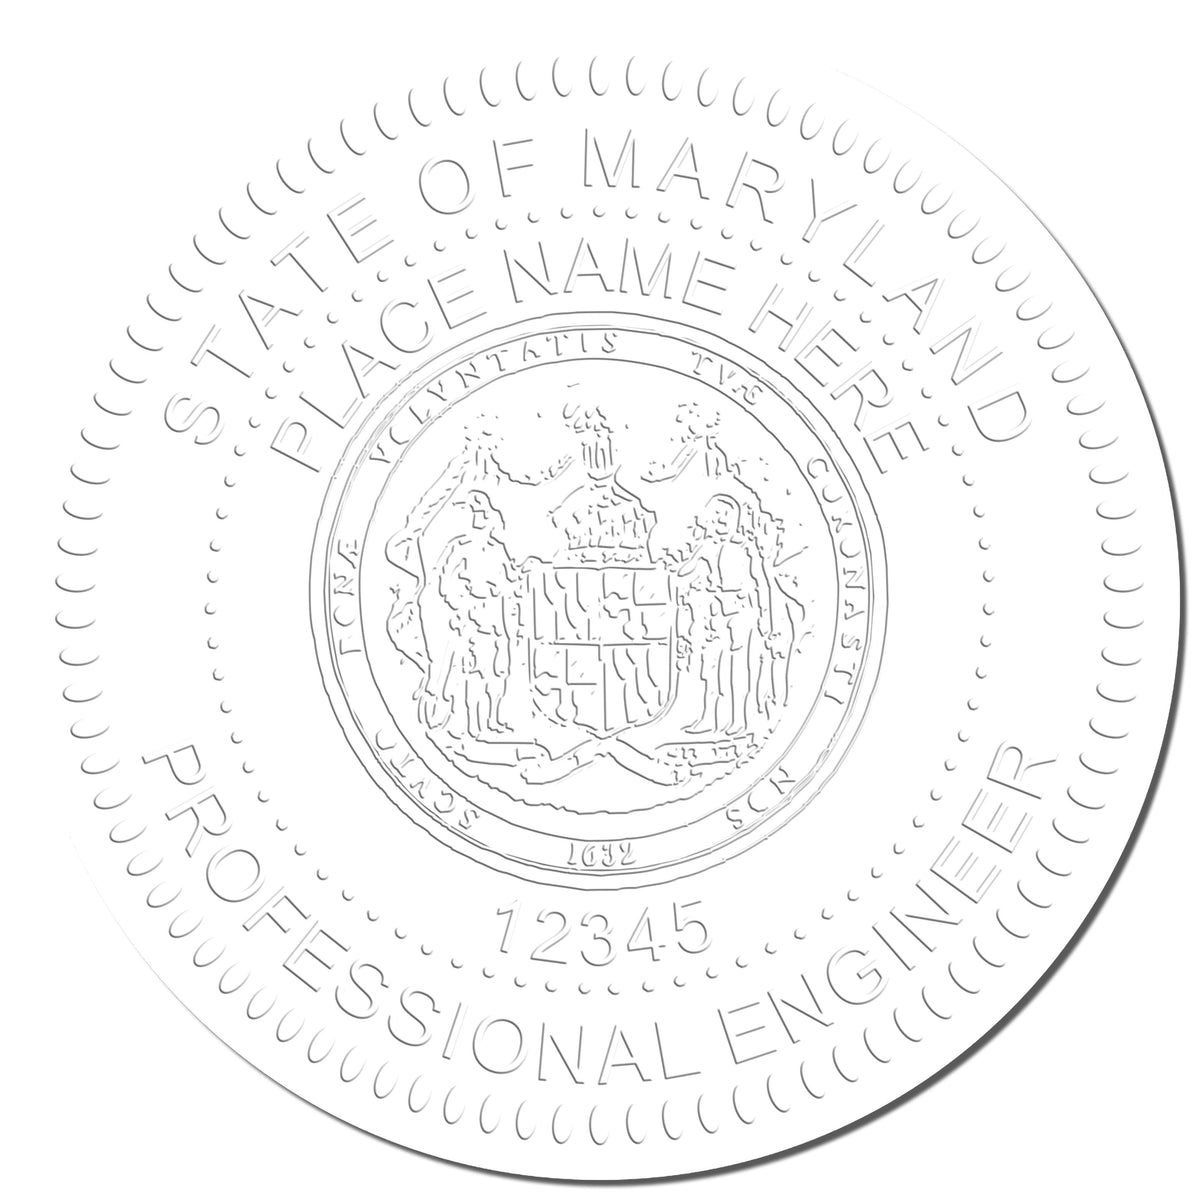 This paper is stamped with a sample imprint of the State of Maryland Extended Long Reach Engineer Seal, signifying its quality and reliability.